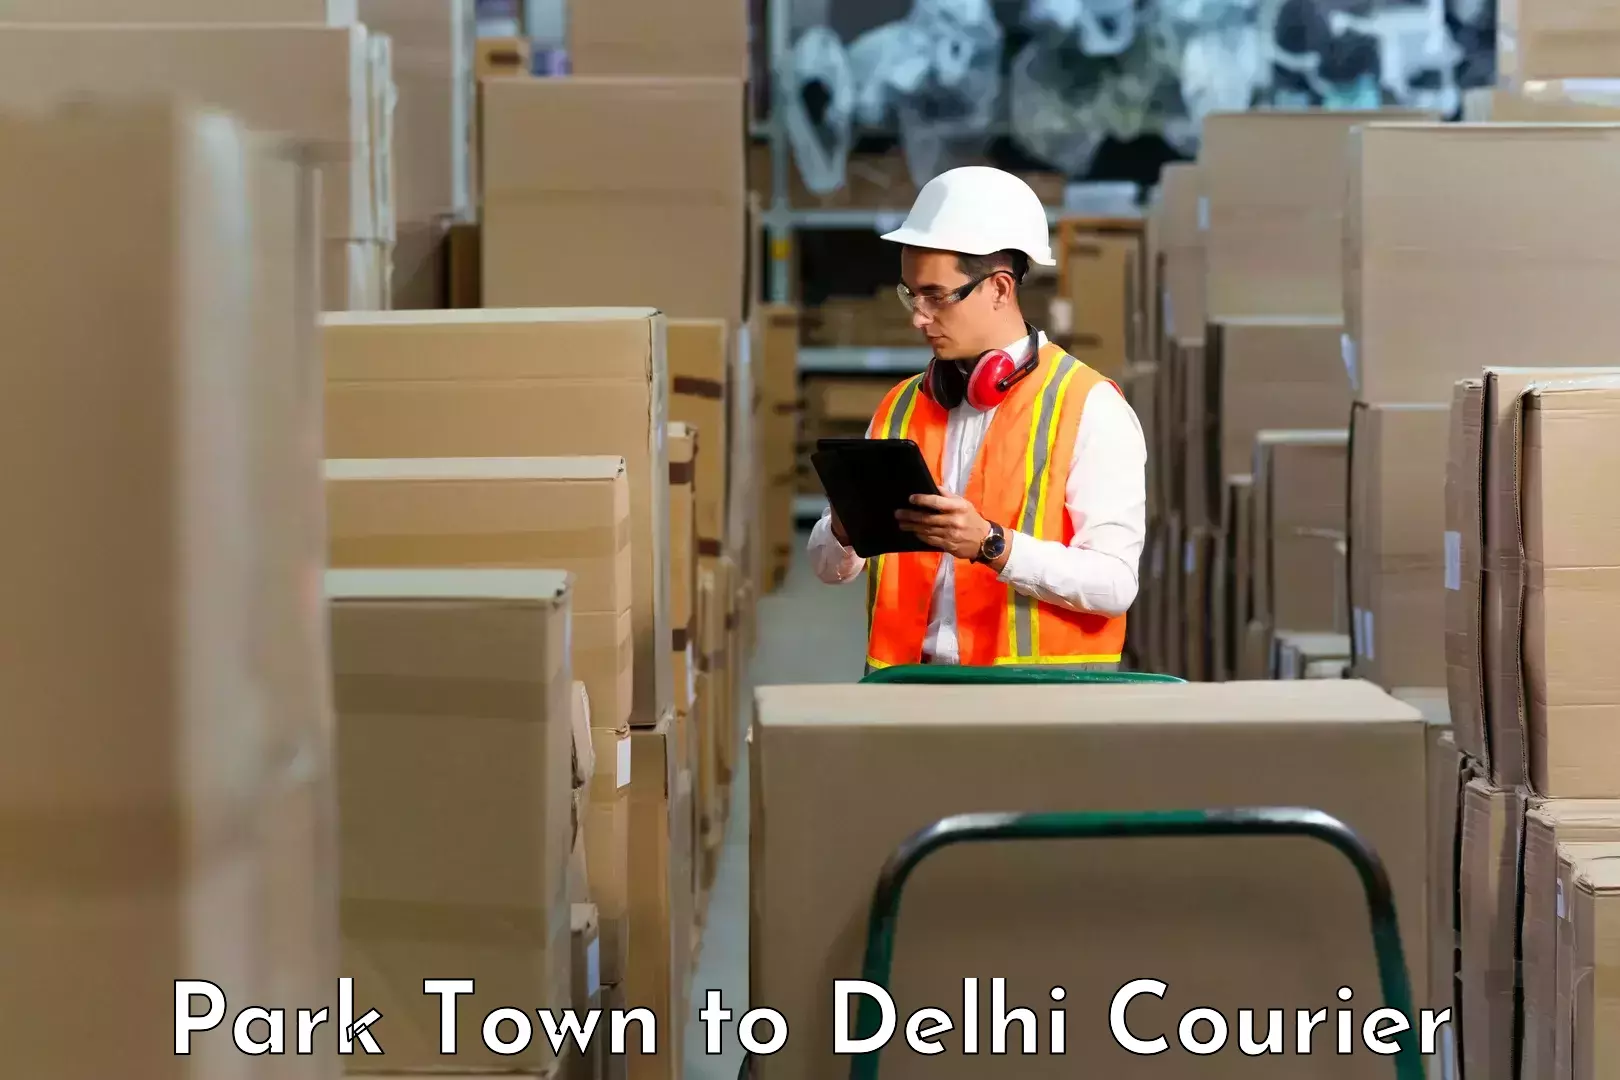 Multi-national courier services Park Town to Delhi